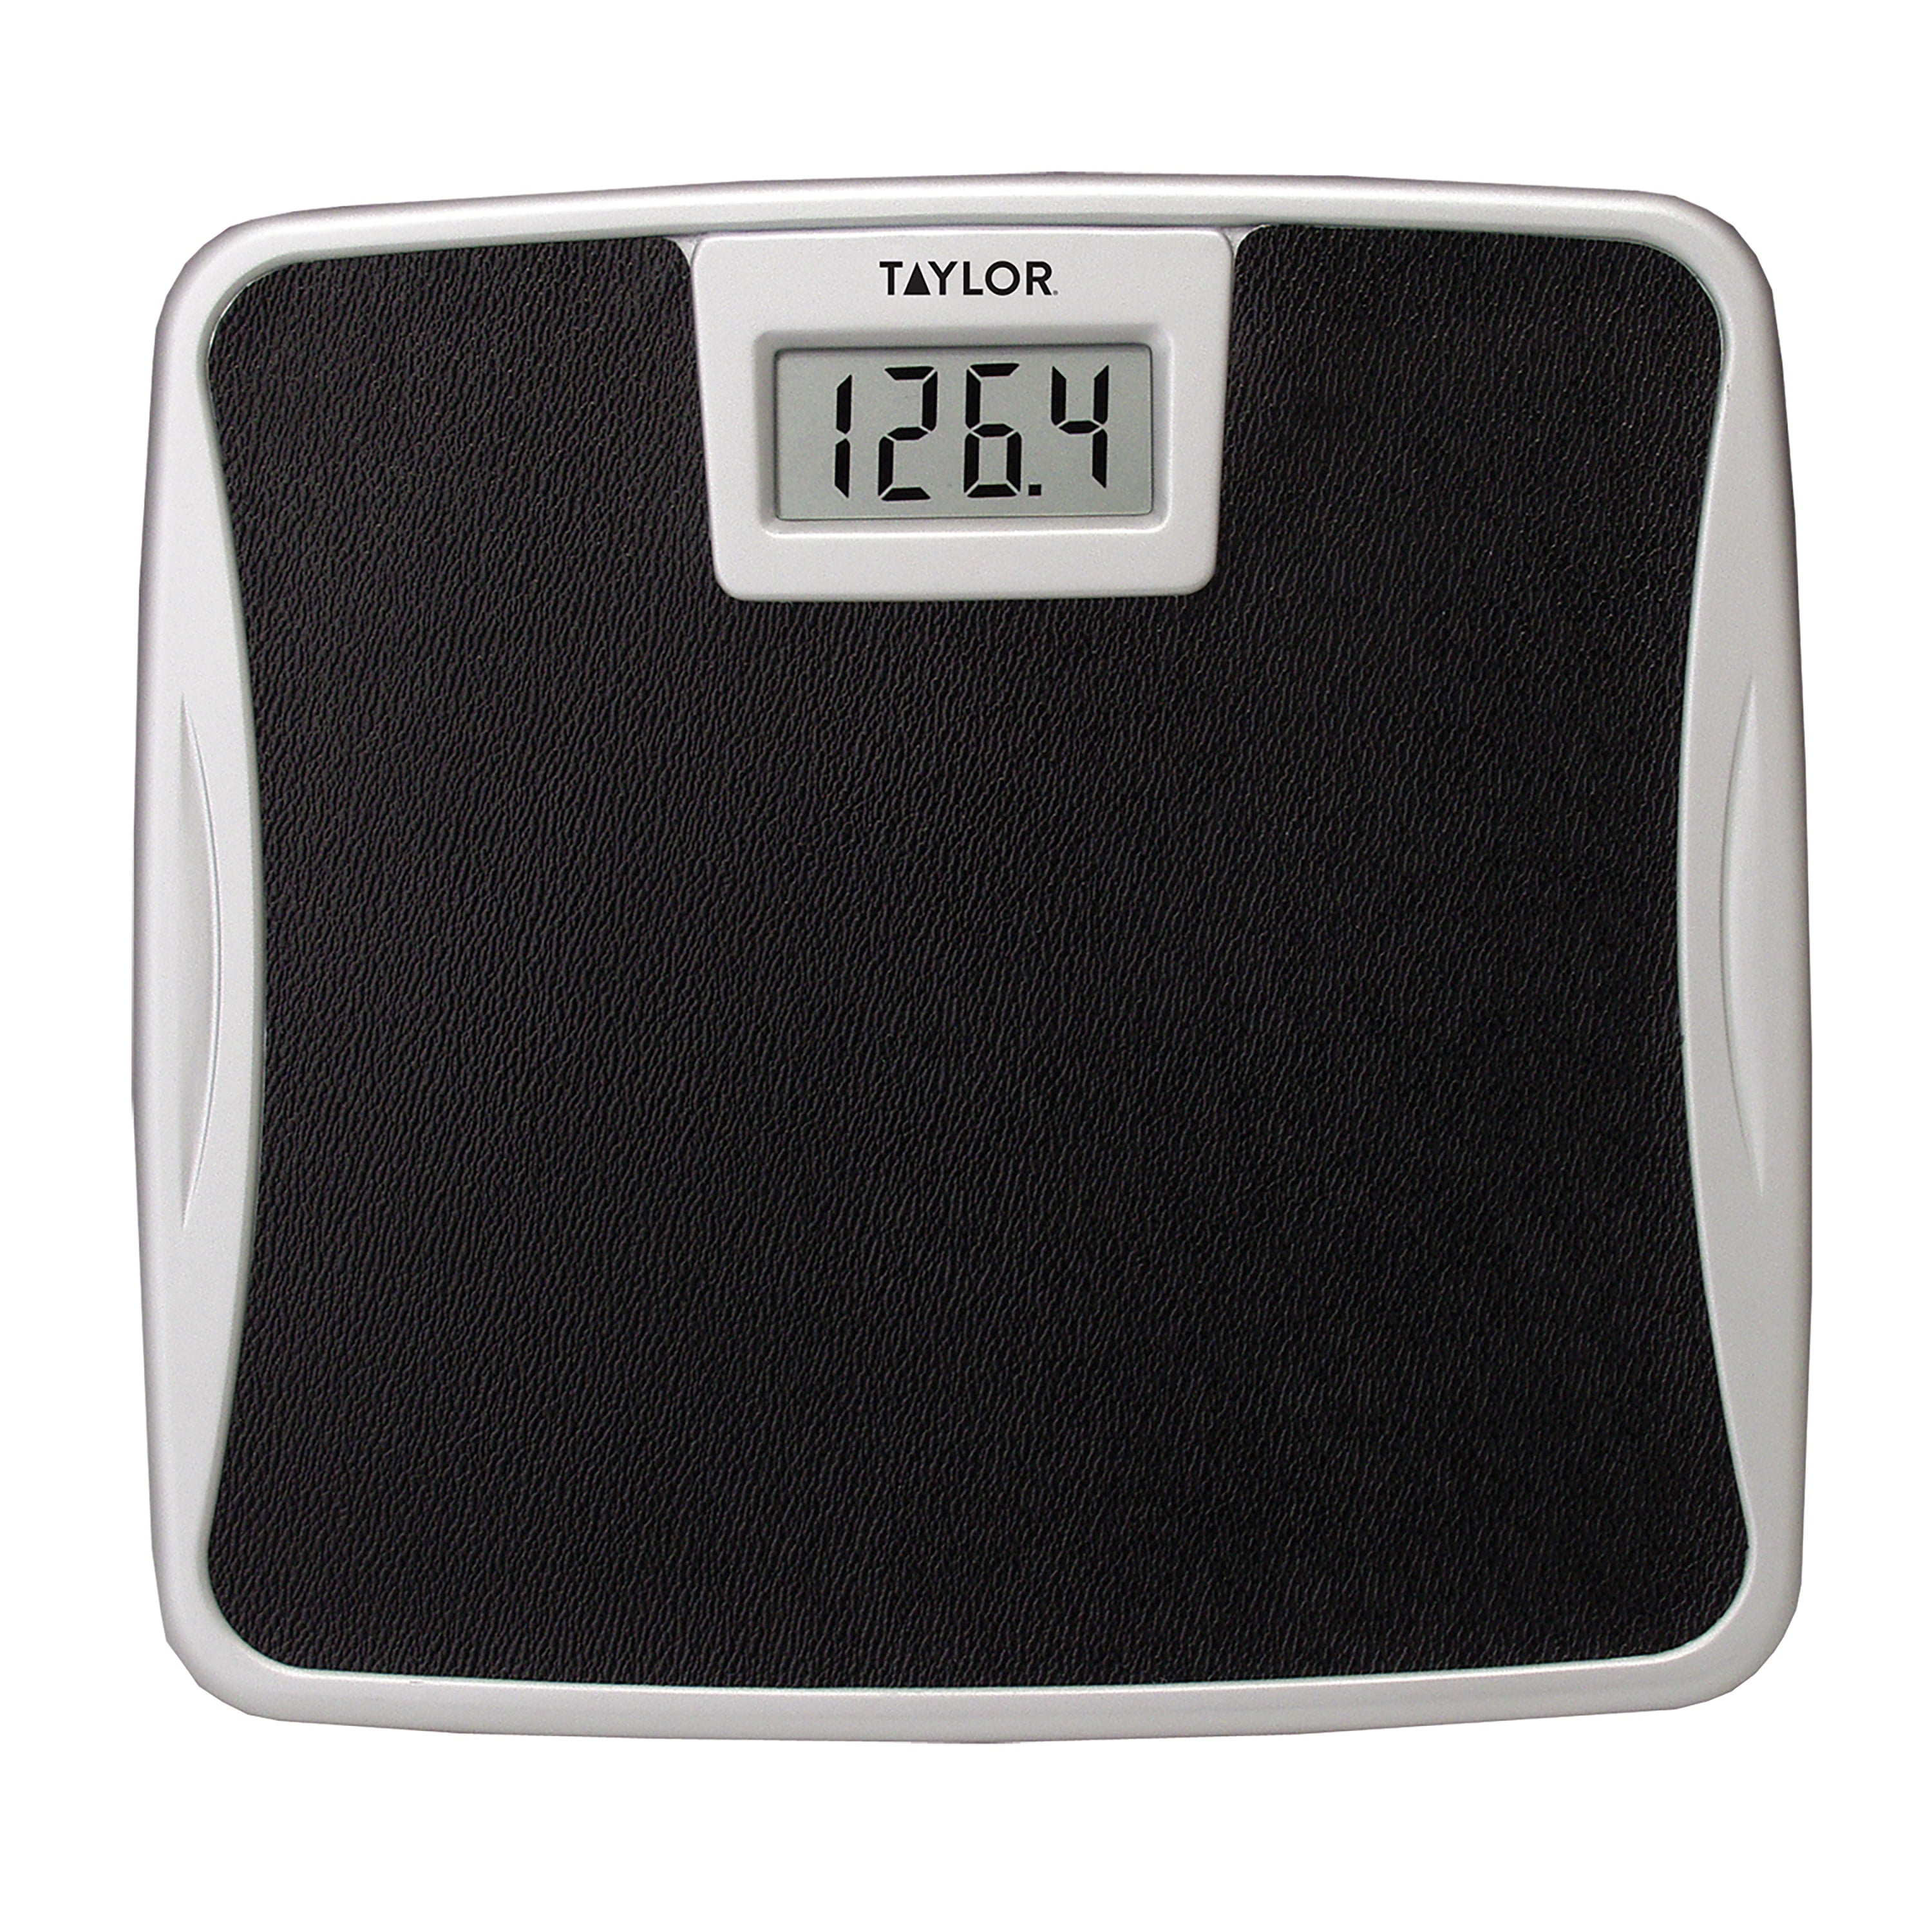 Digital Bathroom Scales and Why You Should Own One For Your Home